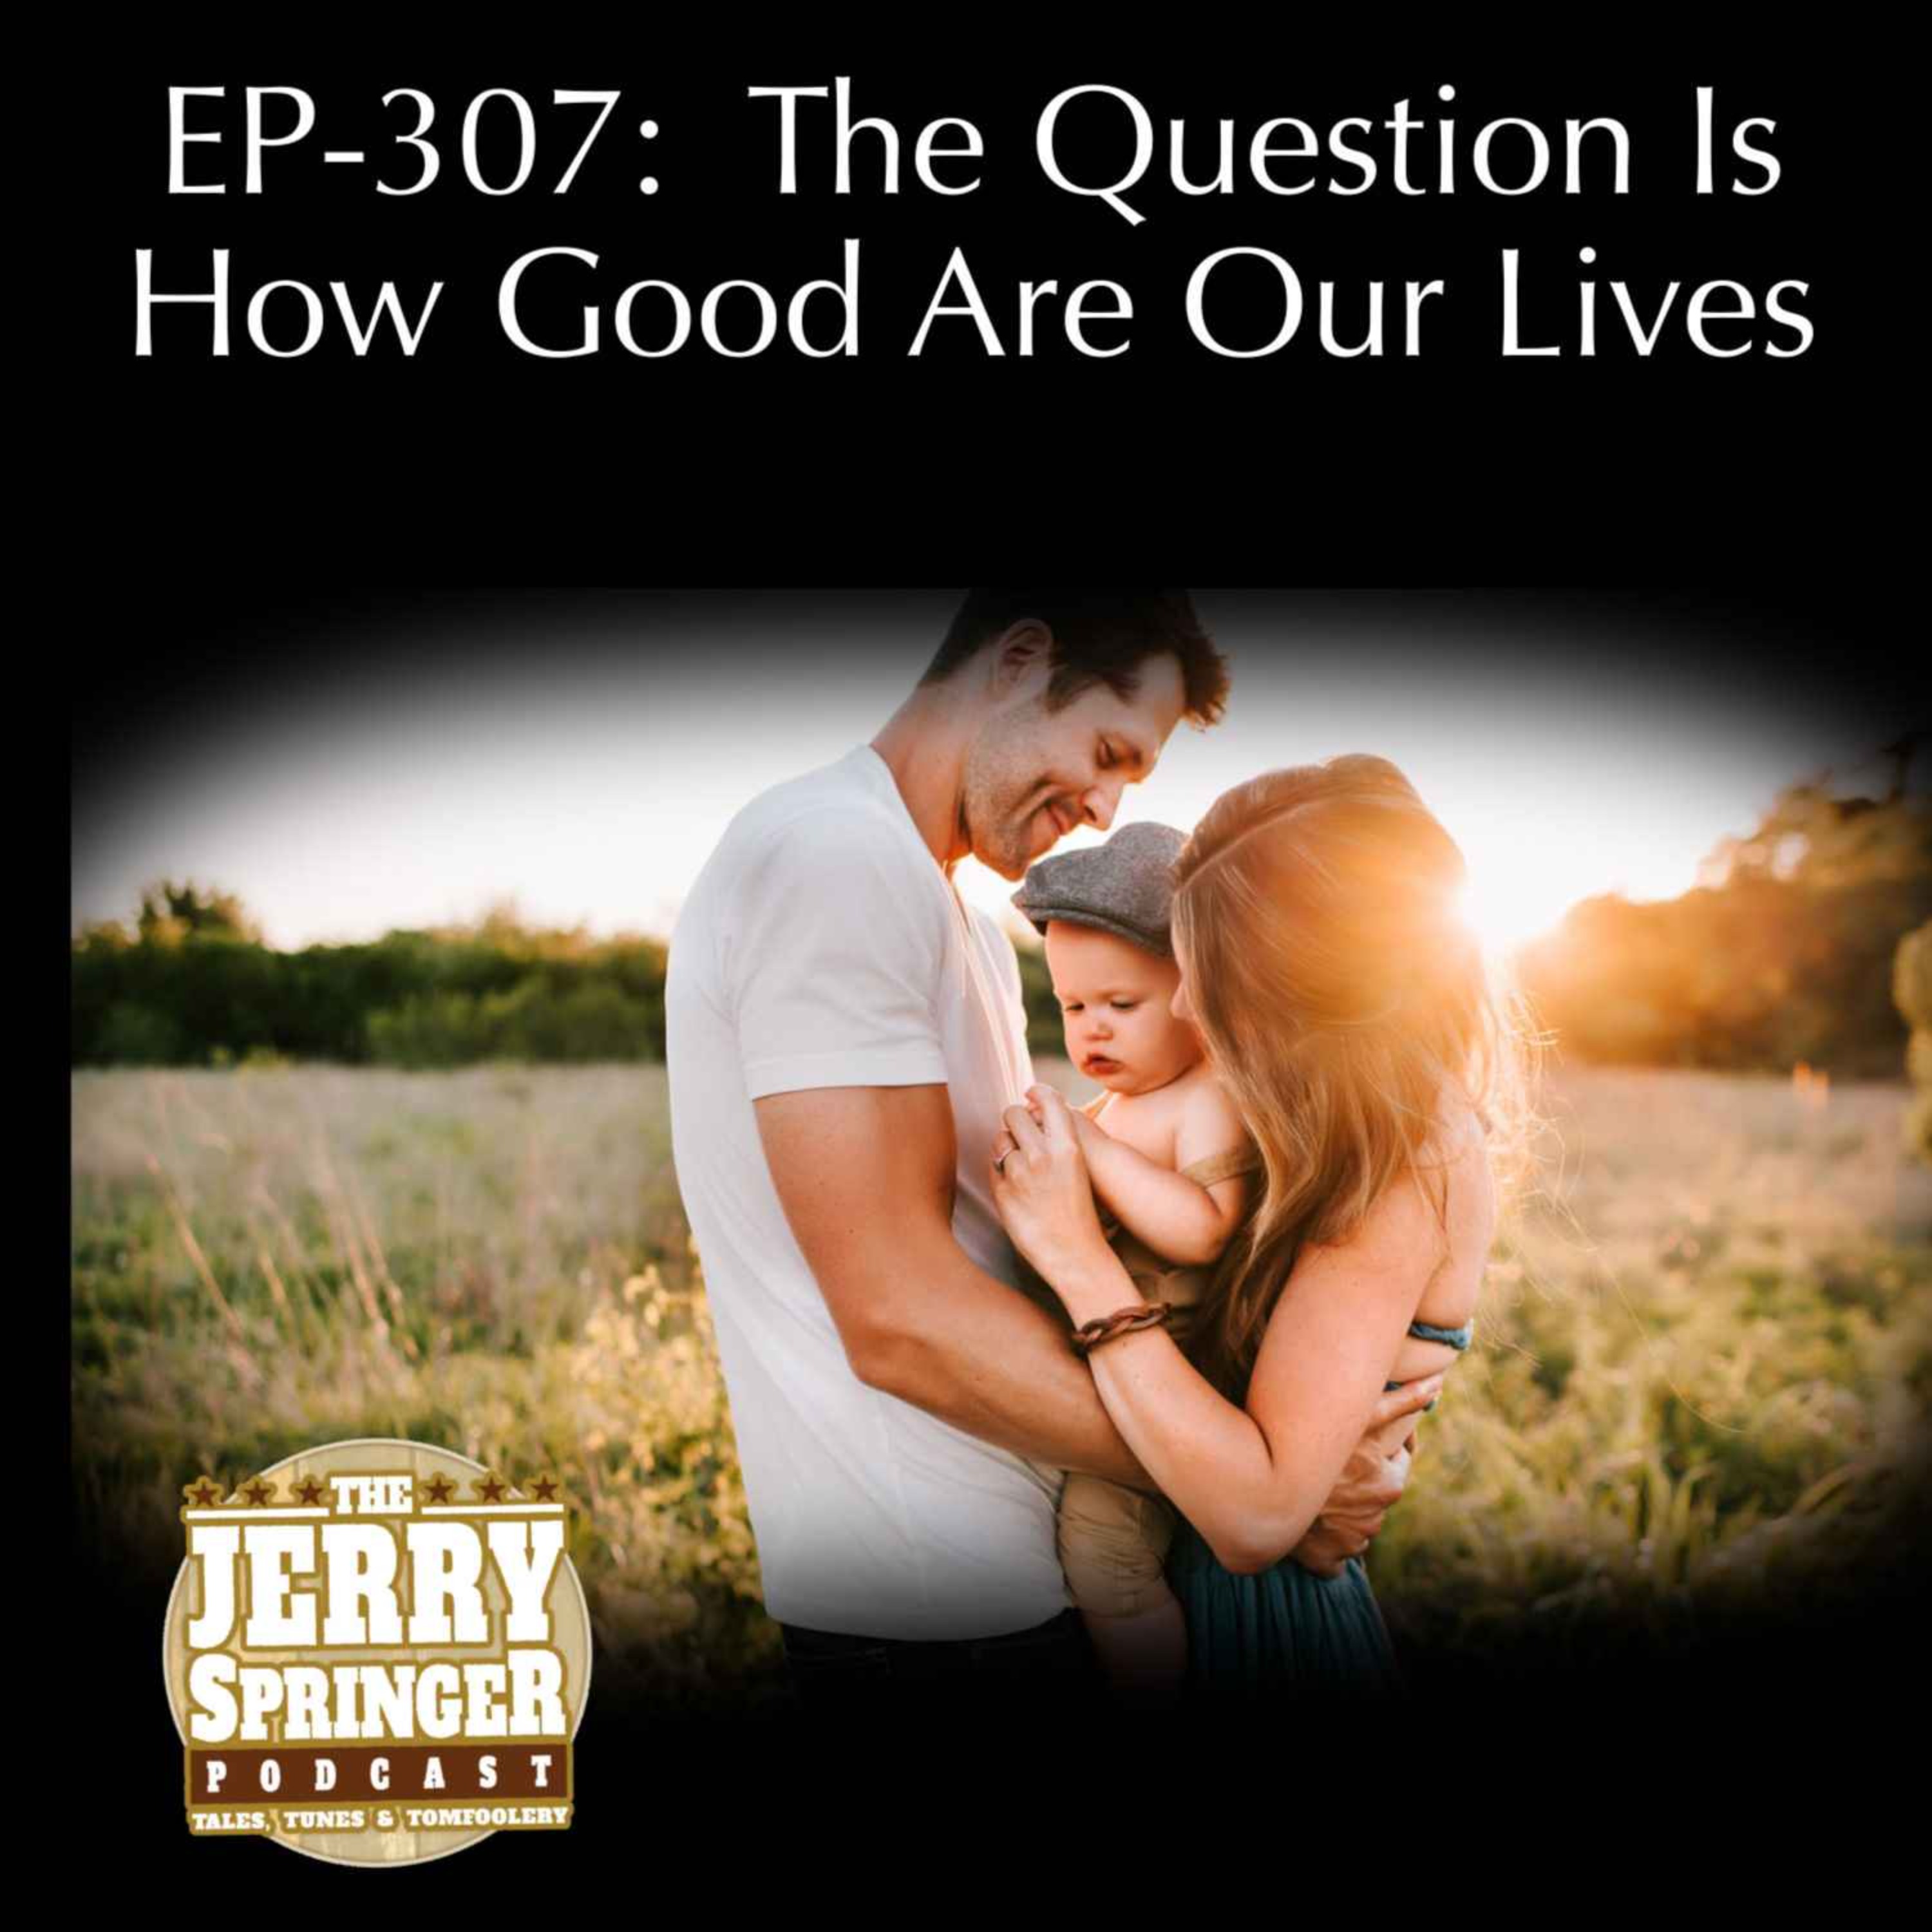 The Question Is How Good Are Our Lives: EP 307